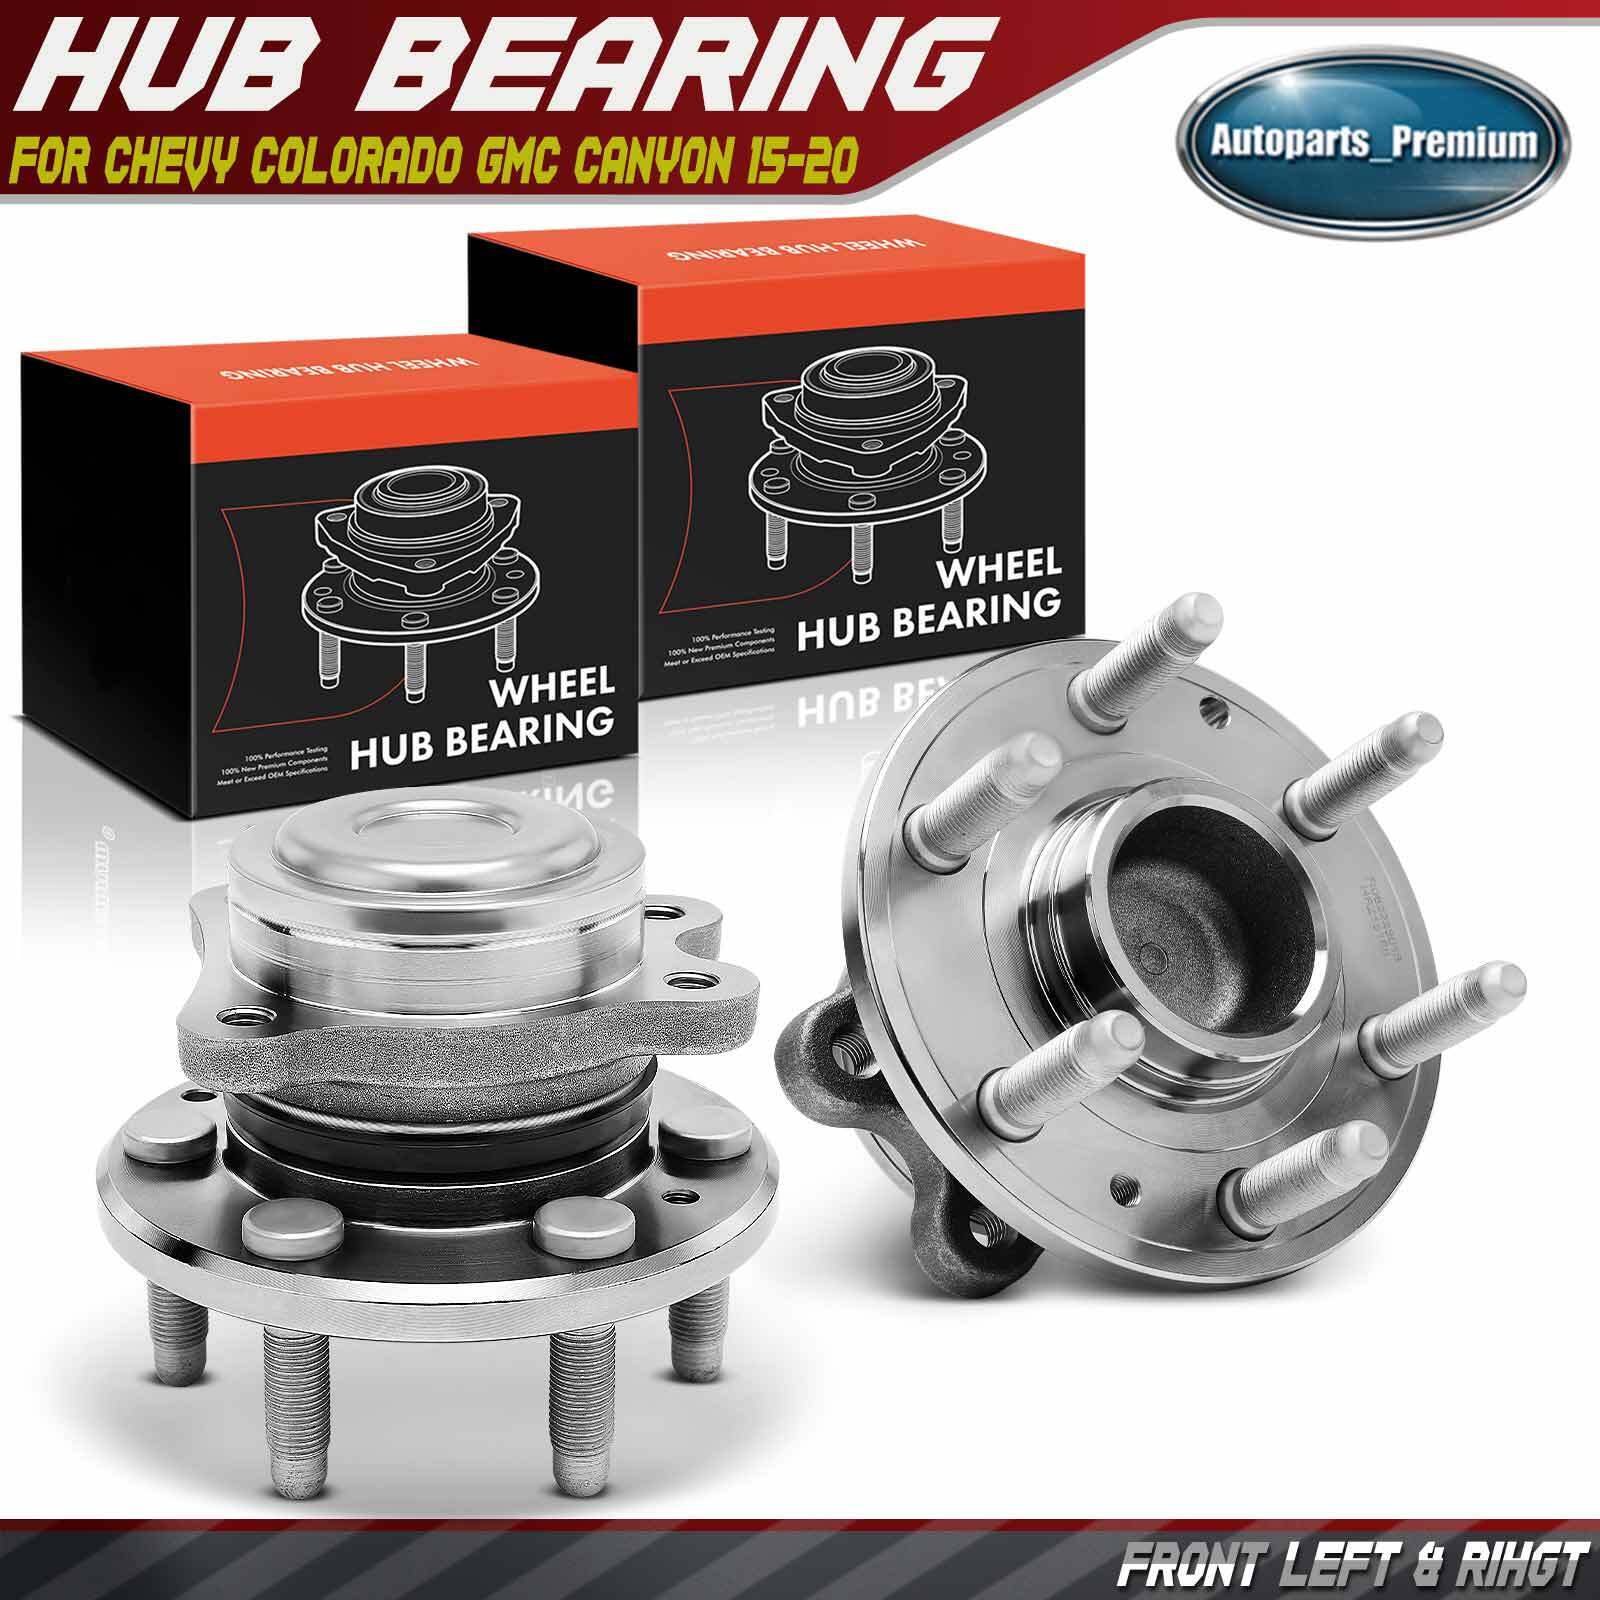 Front L & R Wheel Hub Bearing Assembly for Chevy Colorado GMC Canyon 15-20 RWD